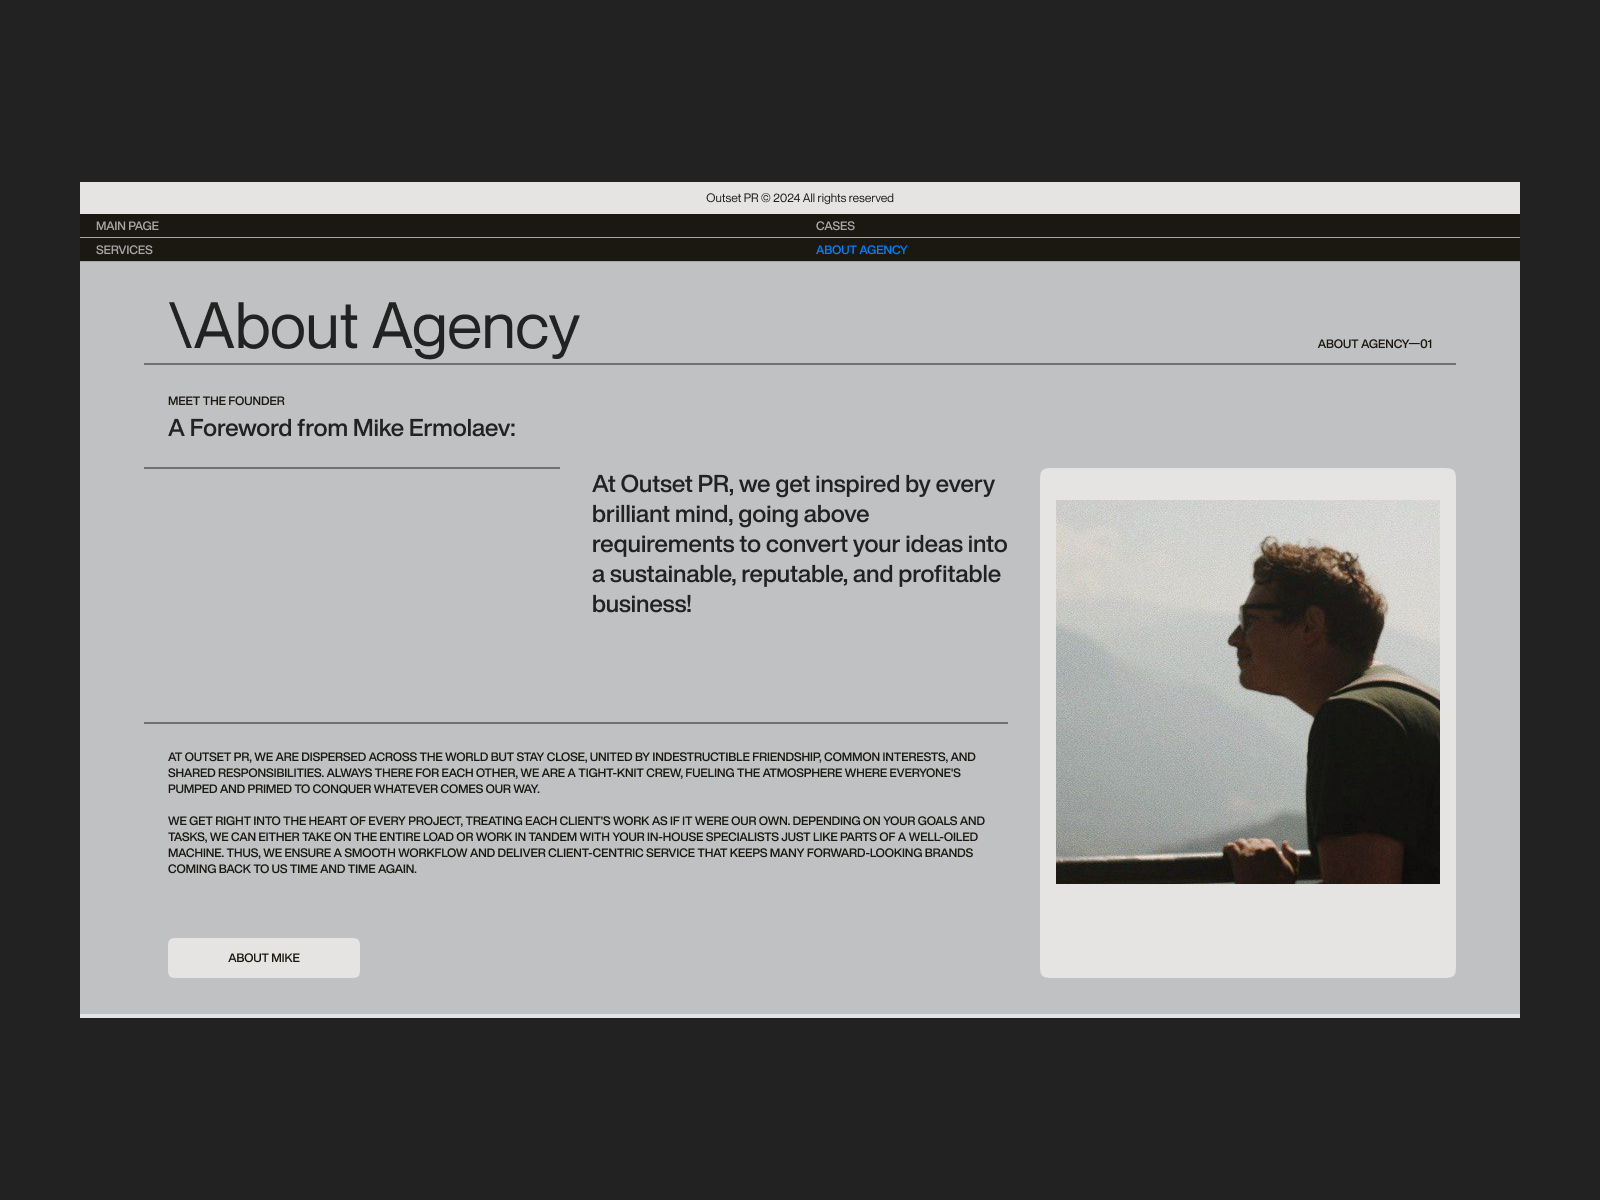 About Agency